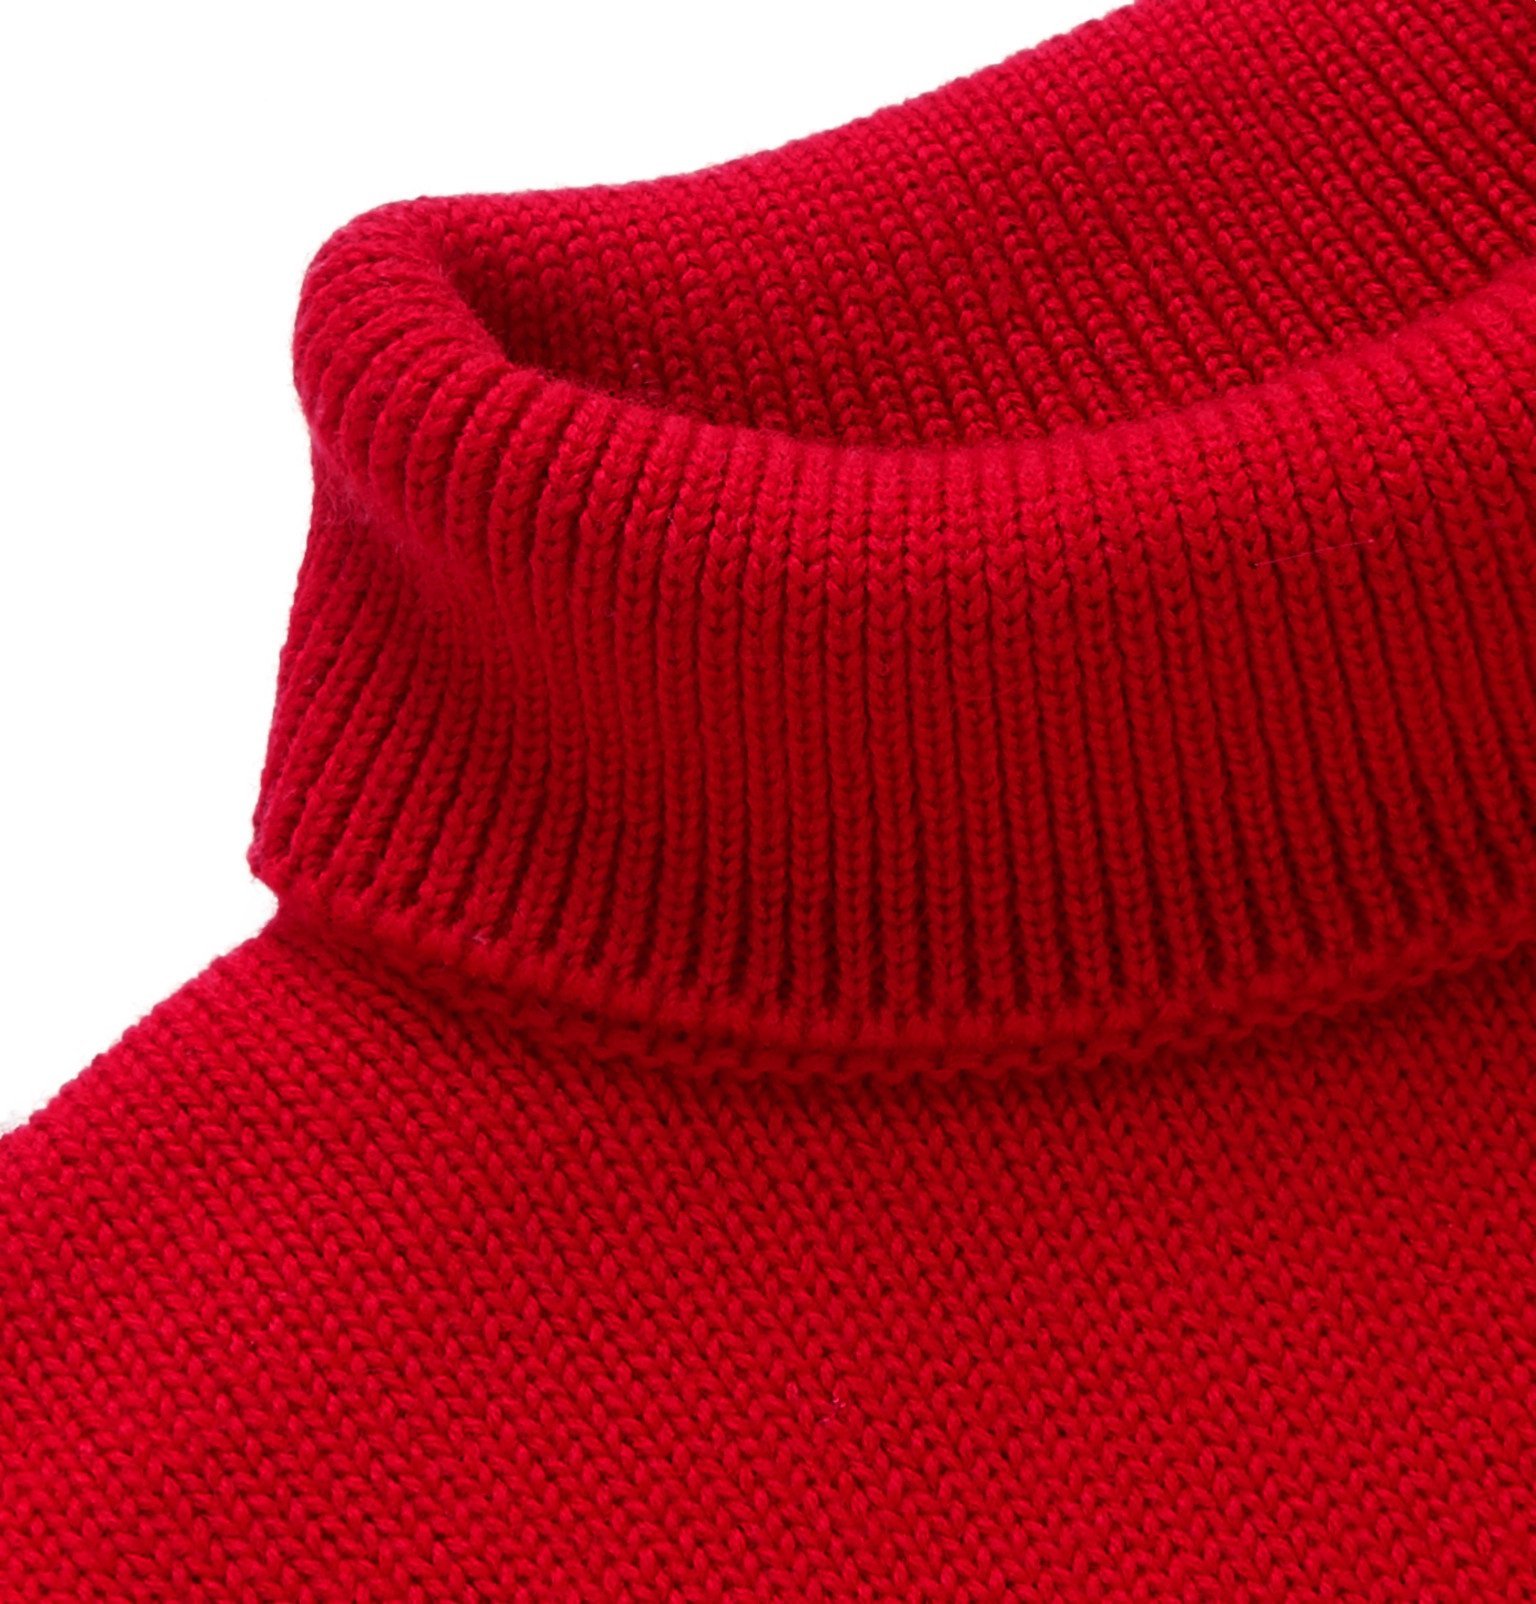 Connolly - Goodwood Merino Wool Rollneck Sweater - Red Connolly